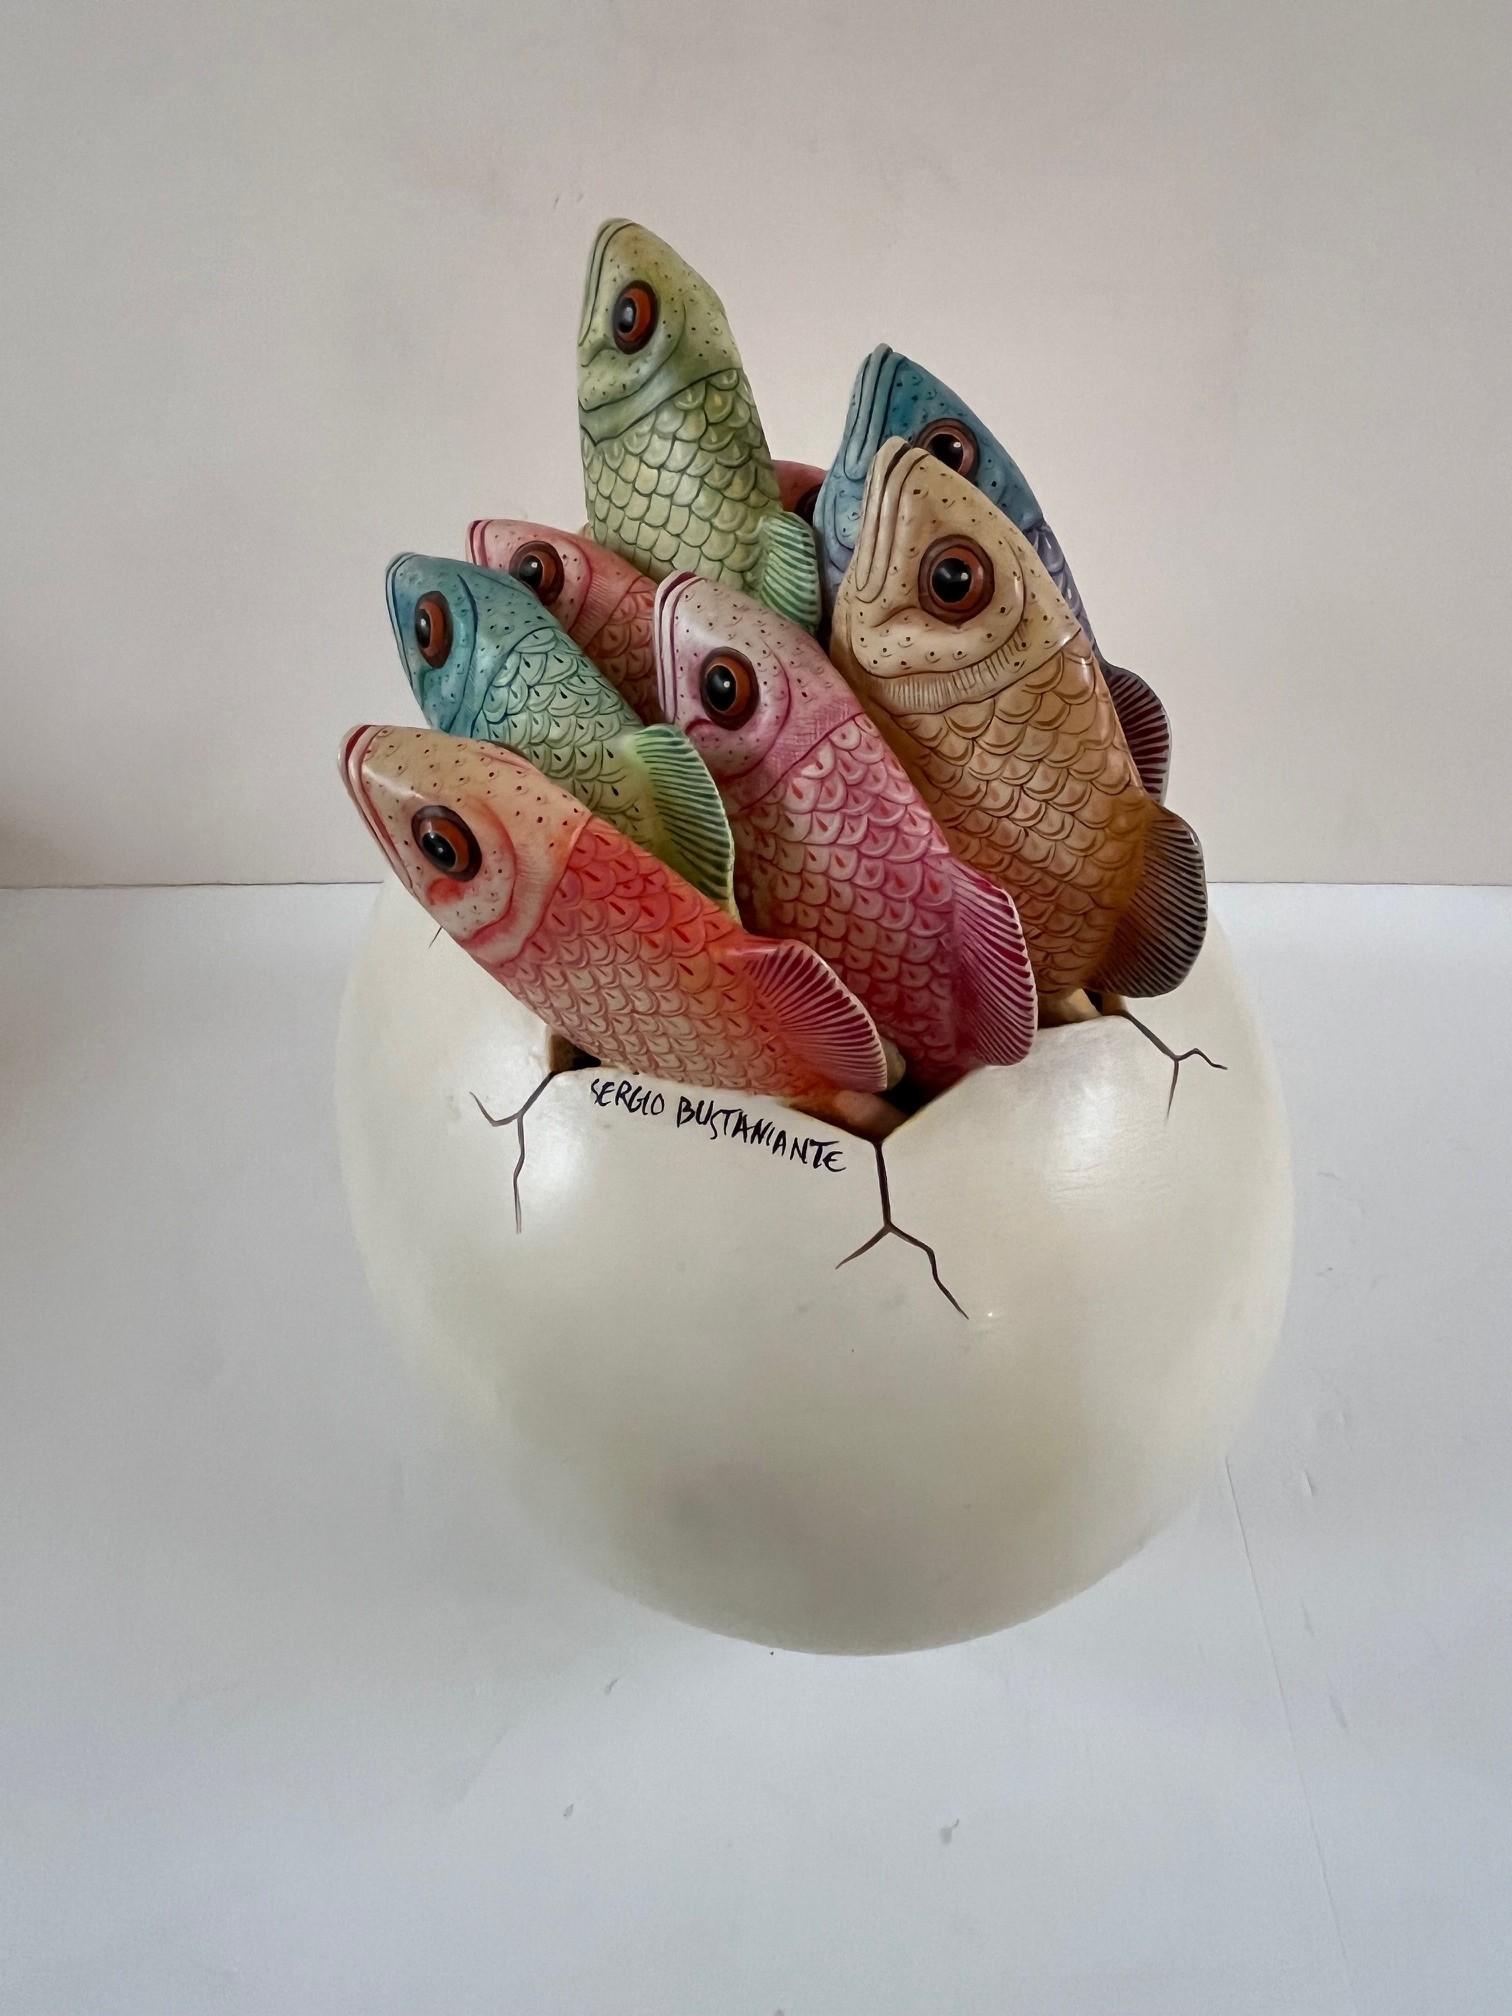 Mid-Century Modern Vintage Large Ceramic Hatching Fish Egg Sculpture Figuring by Sergio Bustamente. For Sale